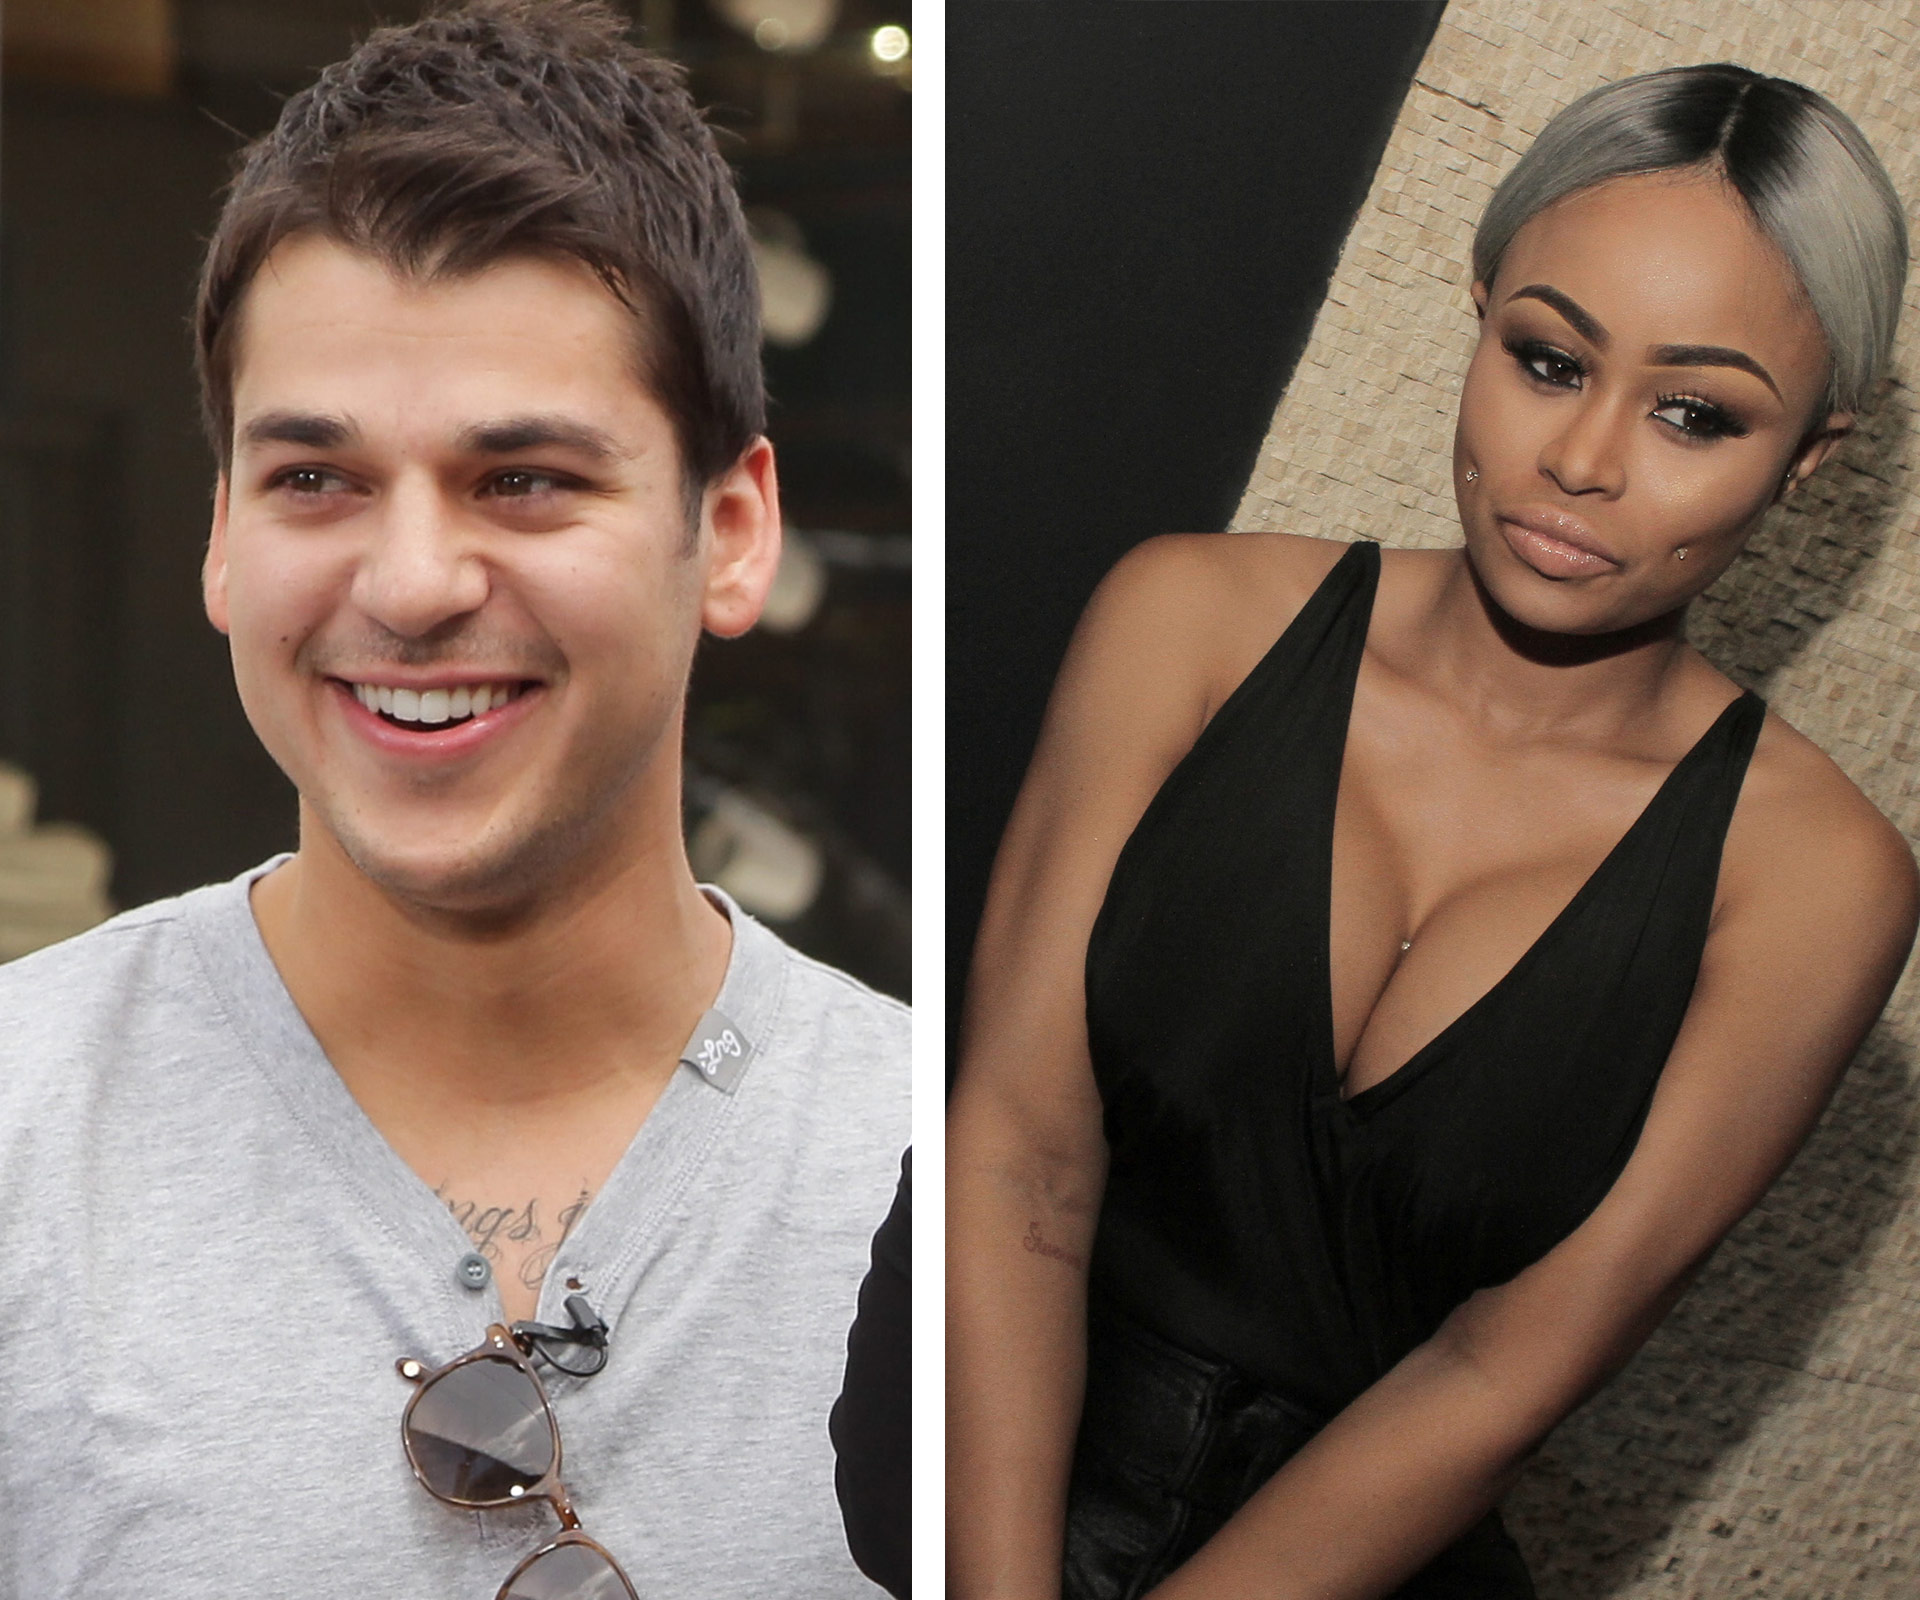 Rob Kardashian confirms his new romance with Blac Chyna with provoking meme